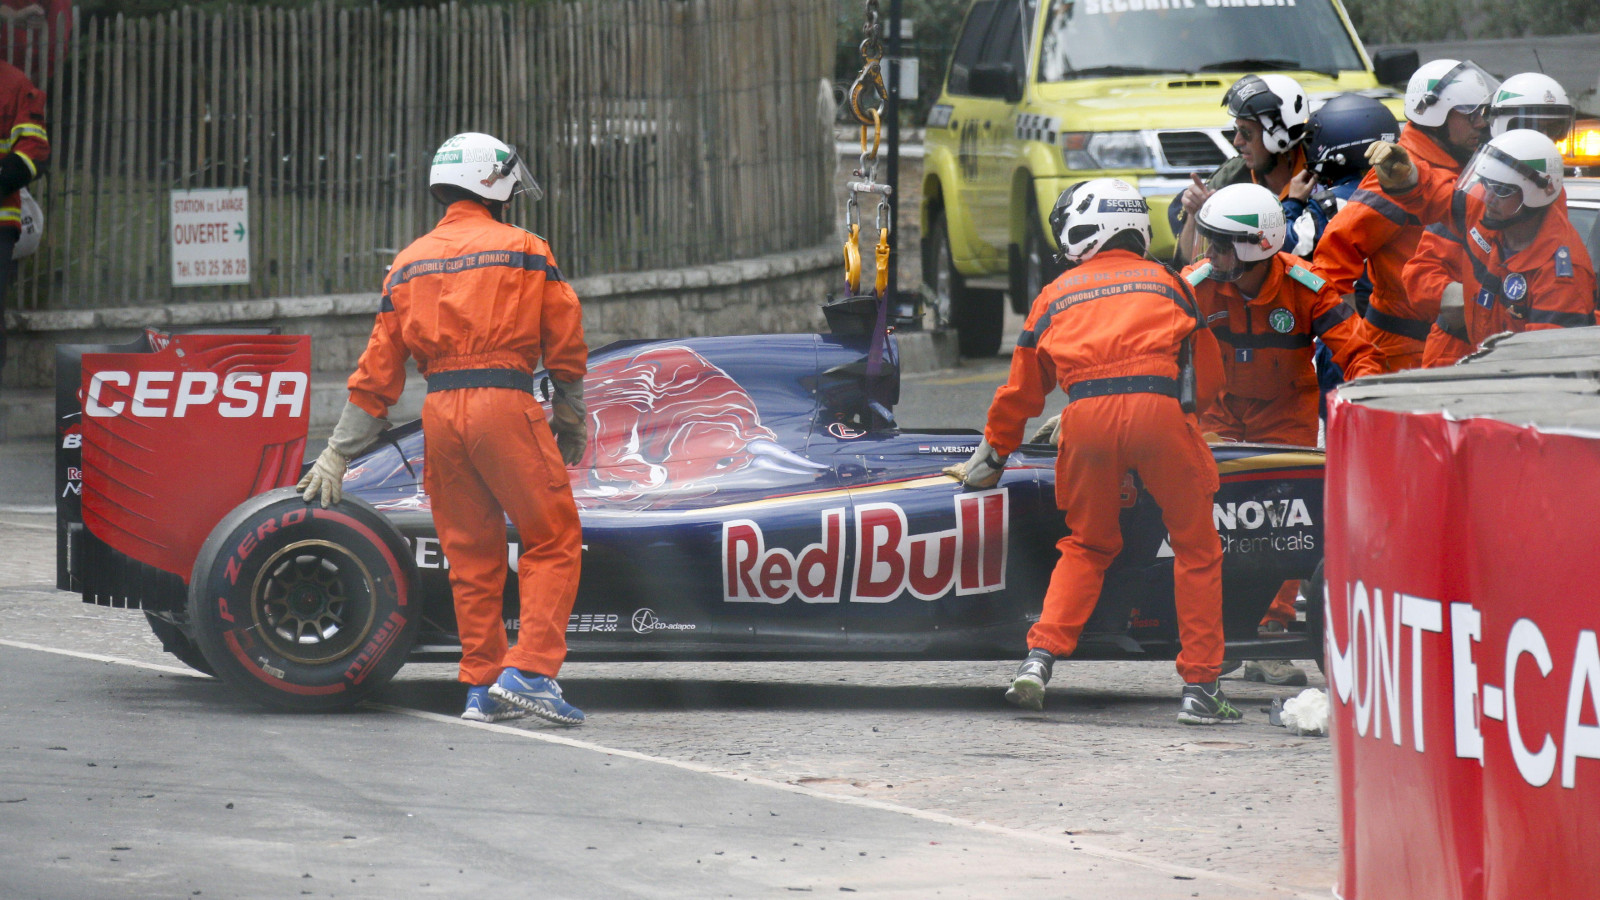 Toro Rosso's Max Verstappen's car is removed from the barriers after a crash. Monte Carlo, May 2015.